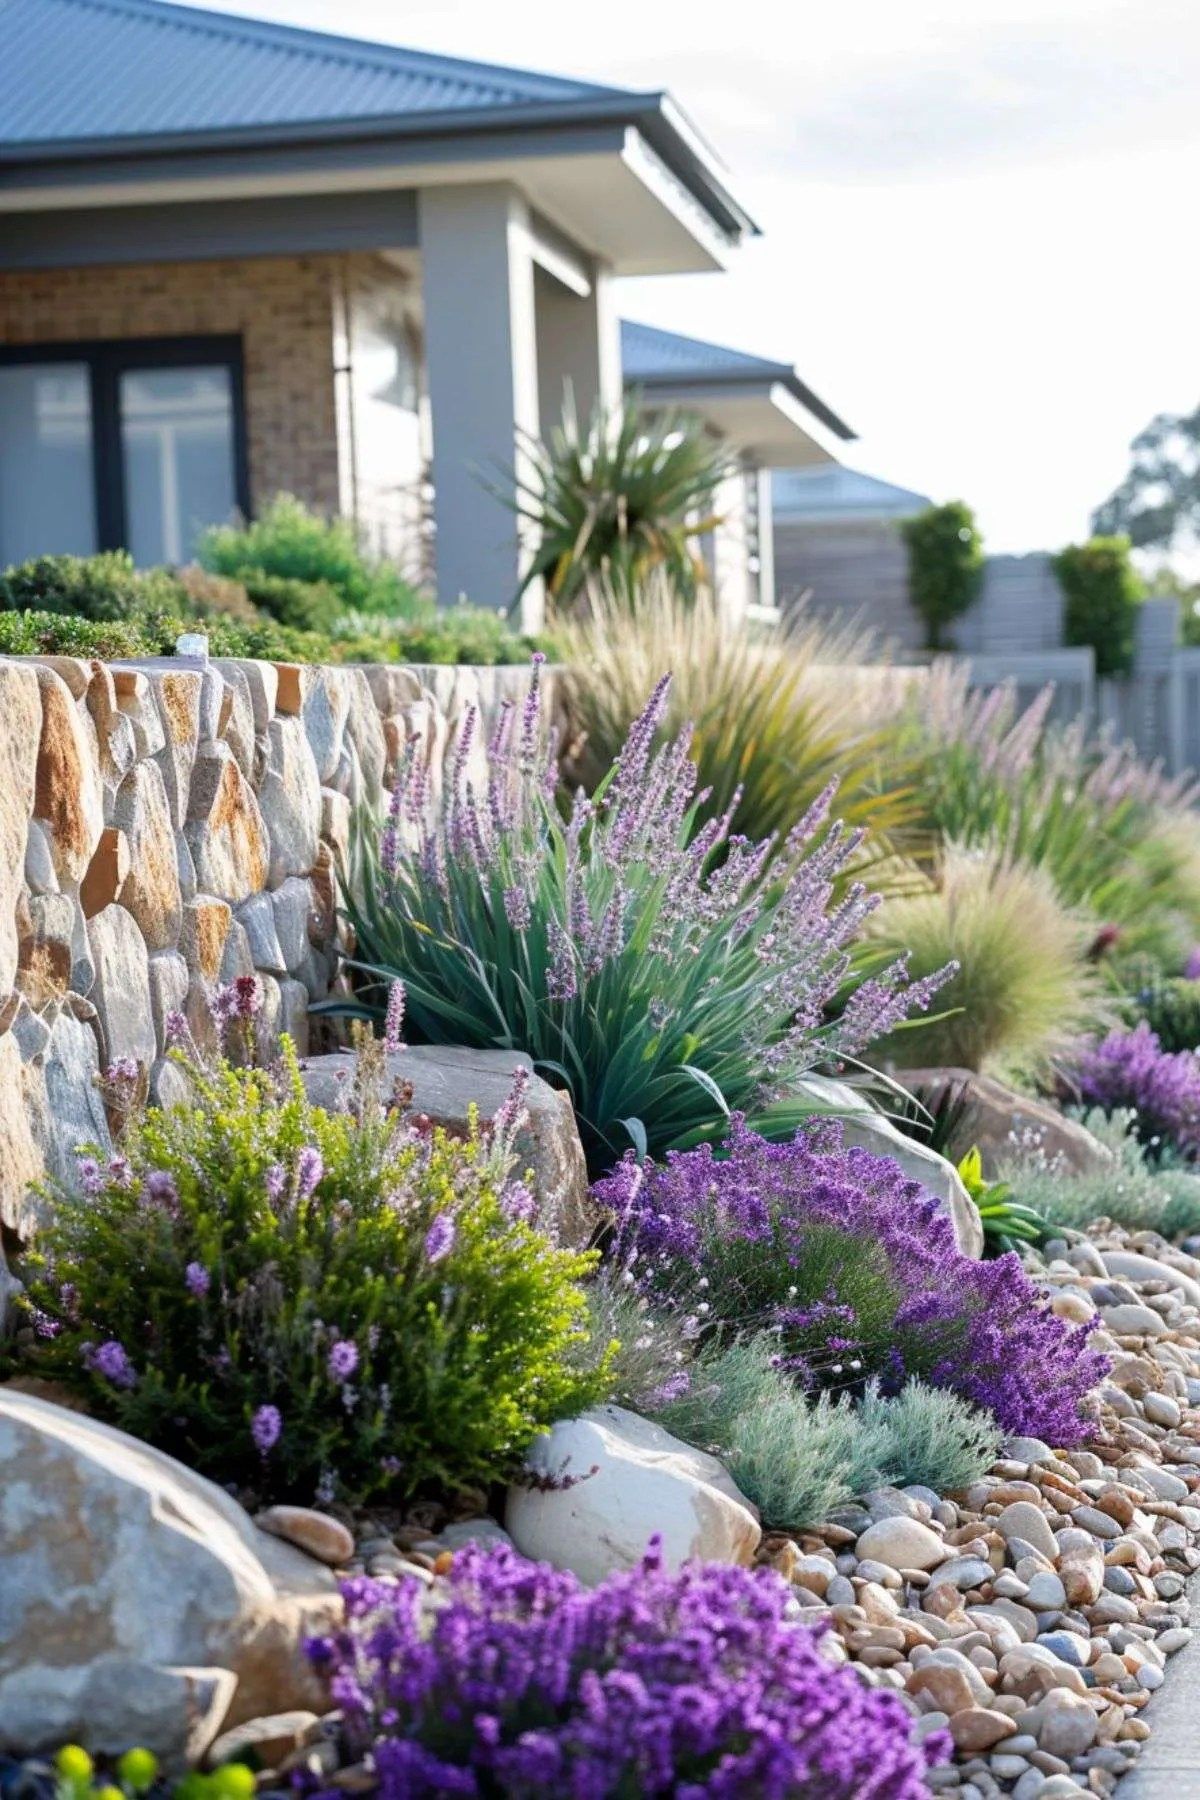 Creating an Inviting Front Yard with Thoughtful Landscaping Arrangements